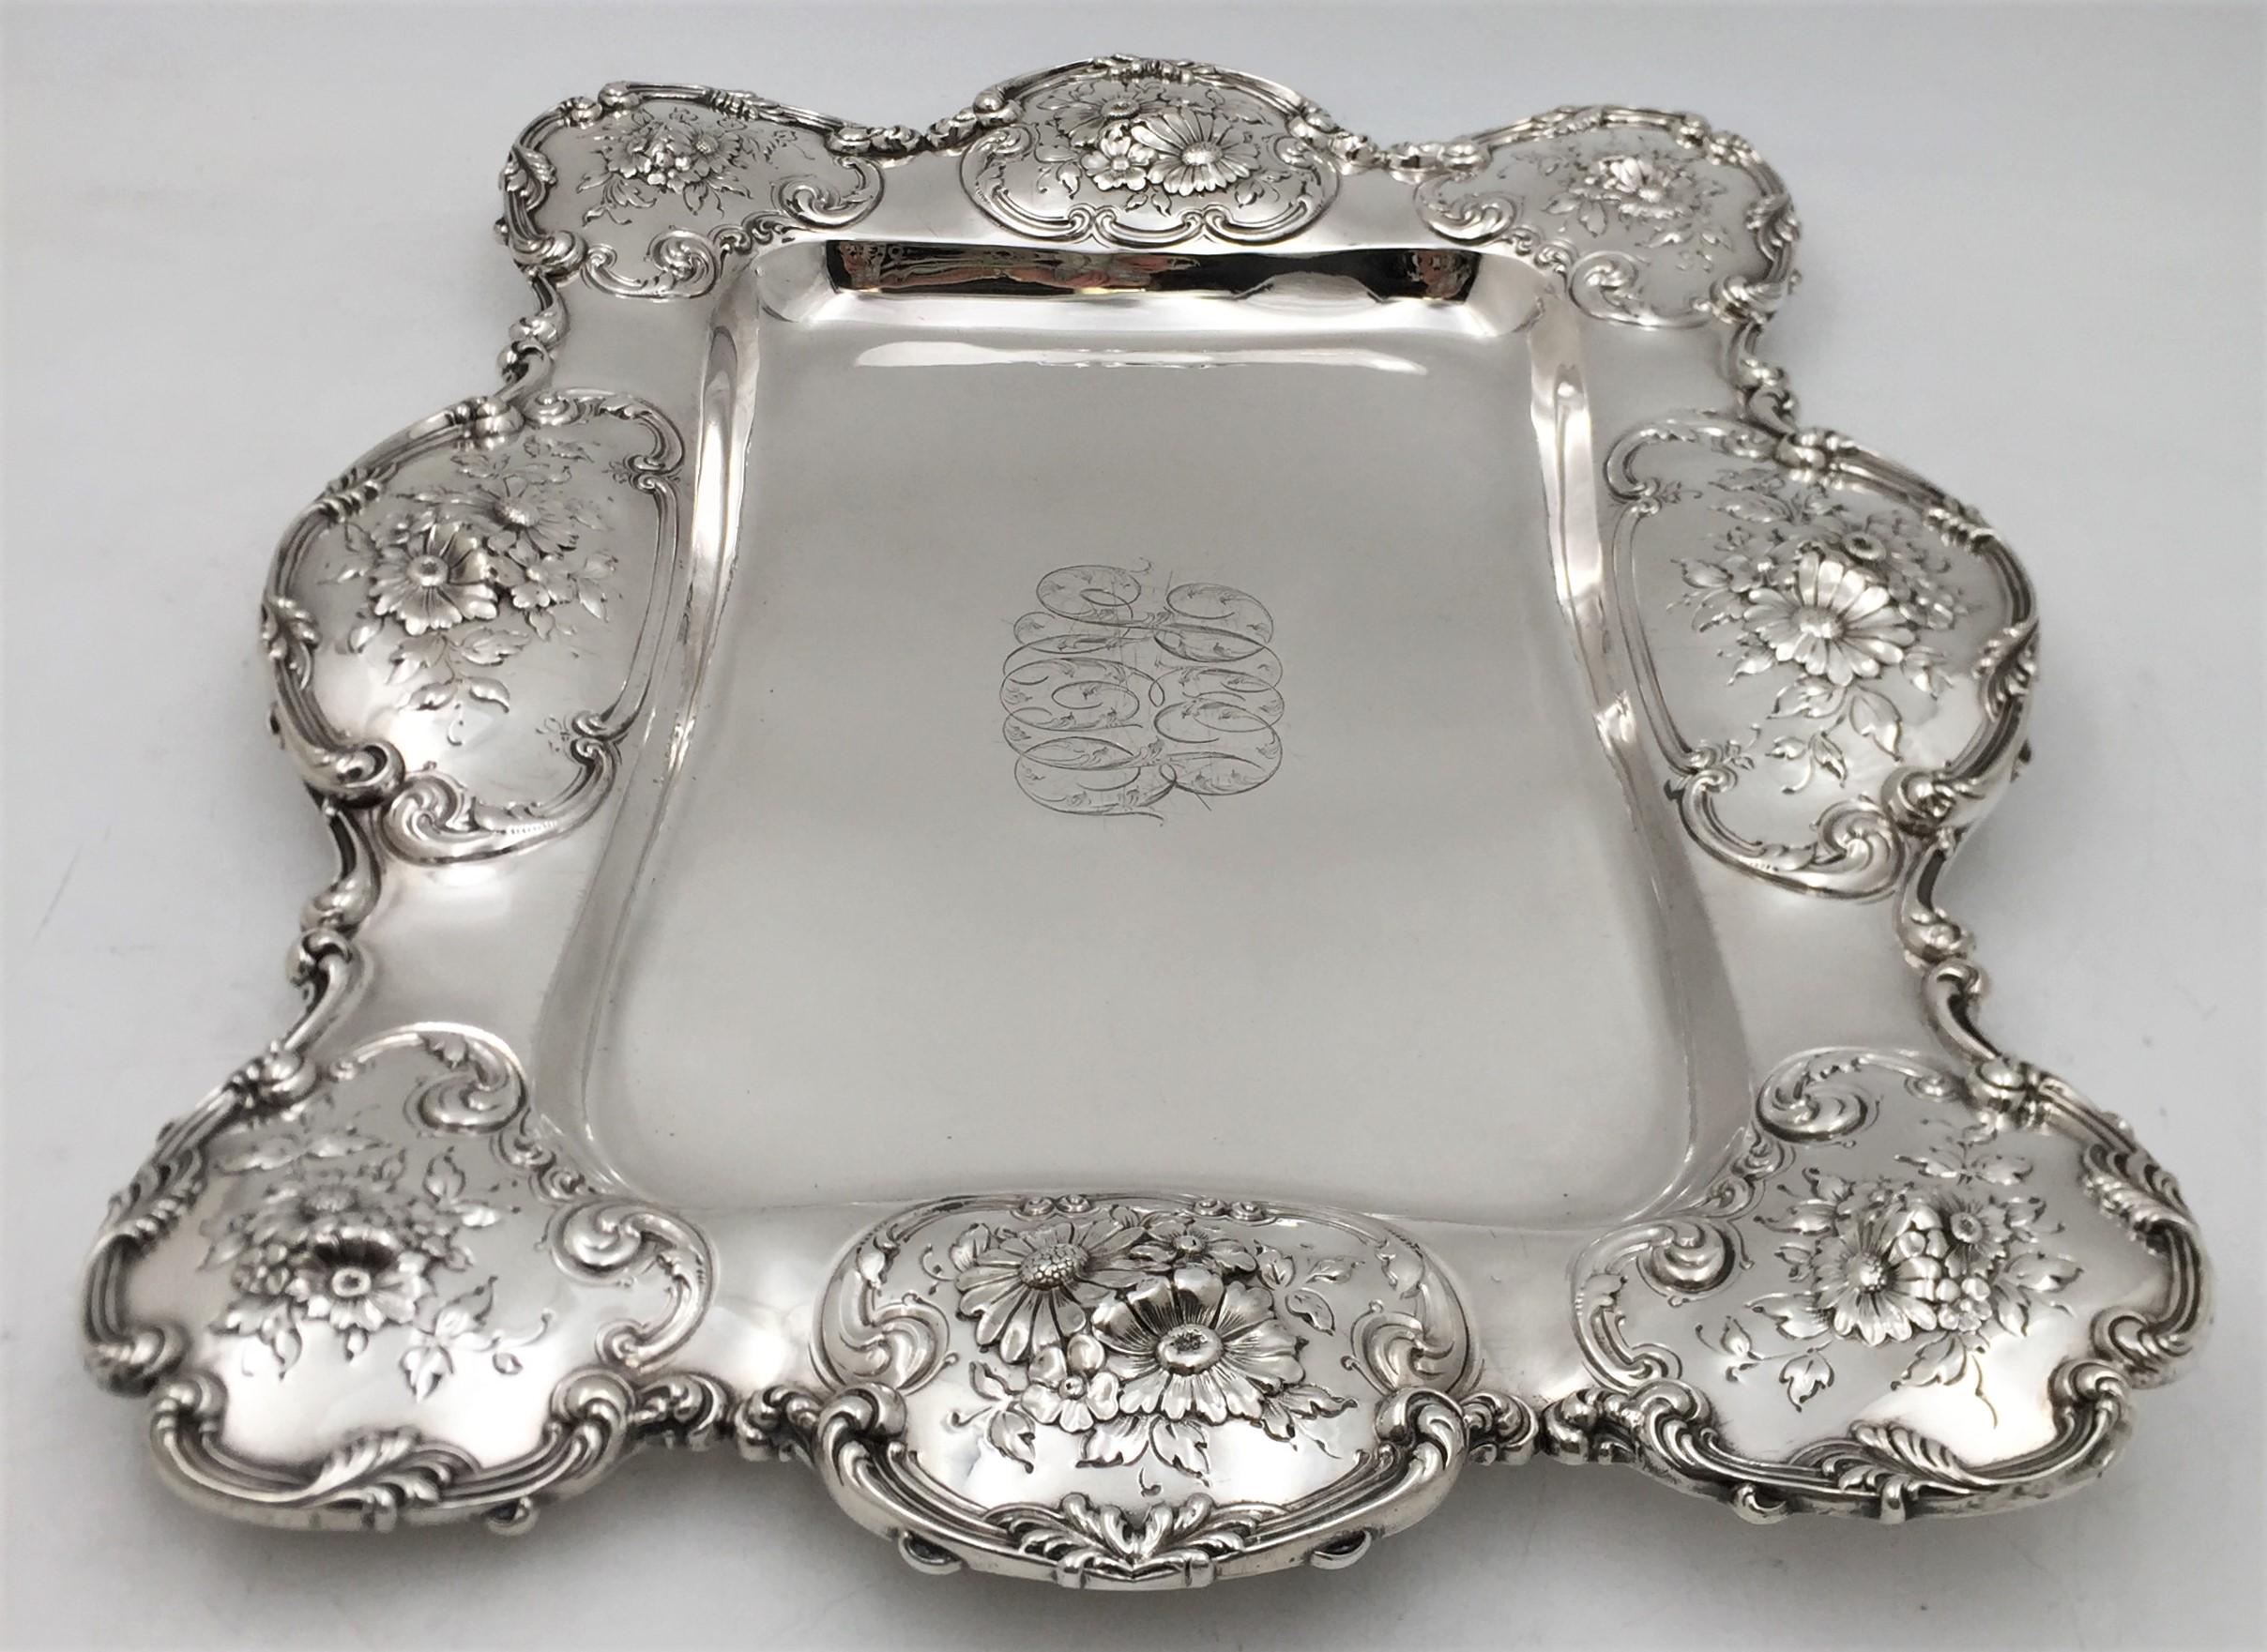 American Theodore Starr Sterling Silver Asparagus Serving Dish Platter Art Nouveau Style